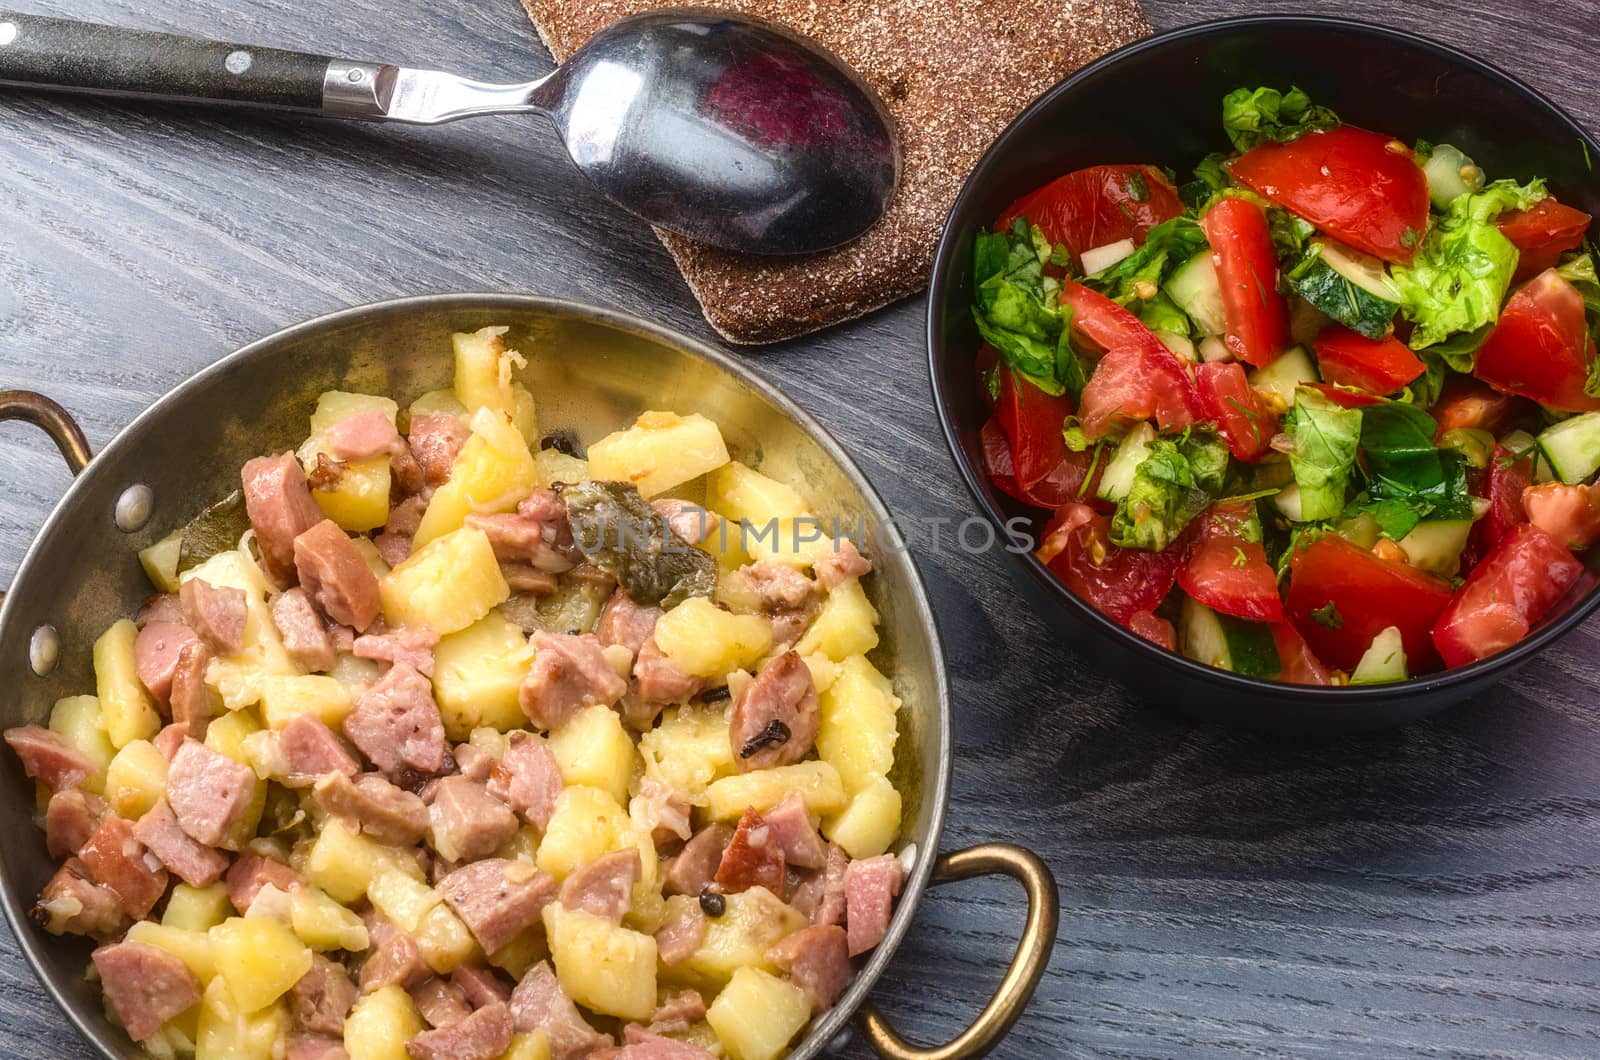 Fried potato with meat and vegetables